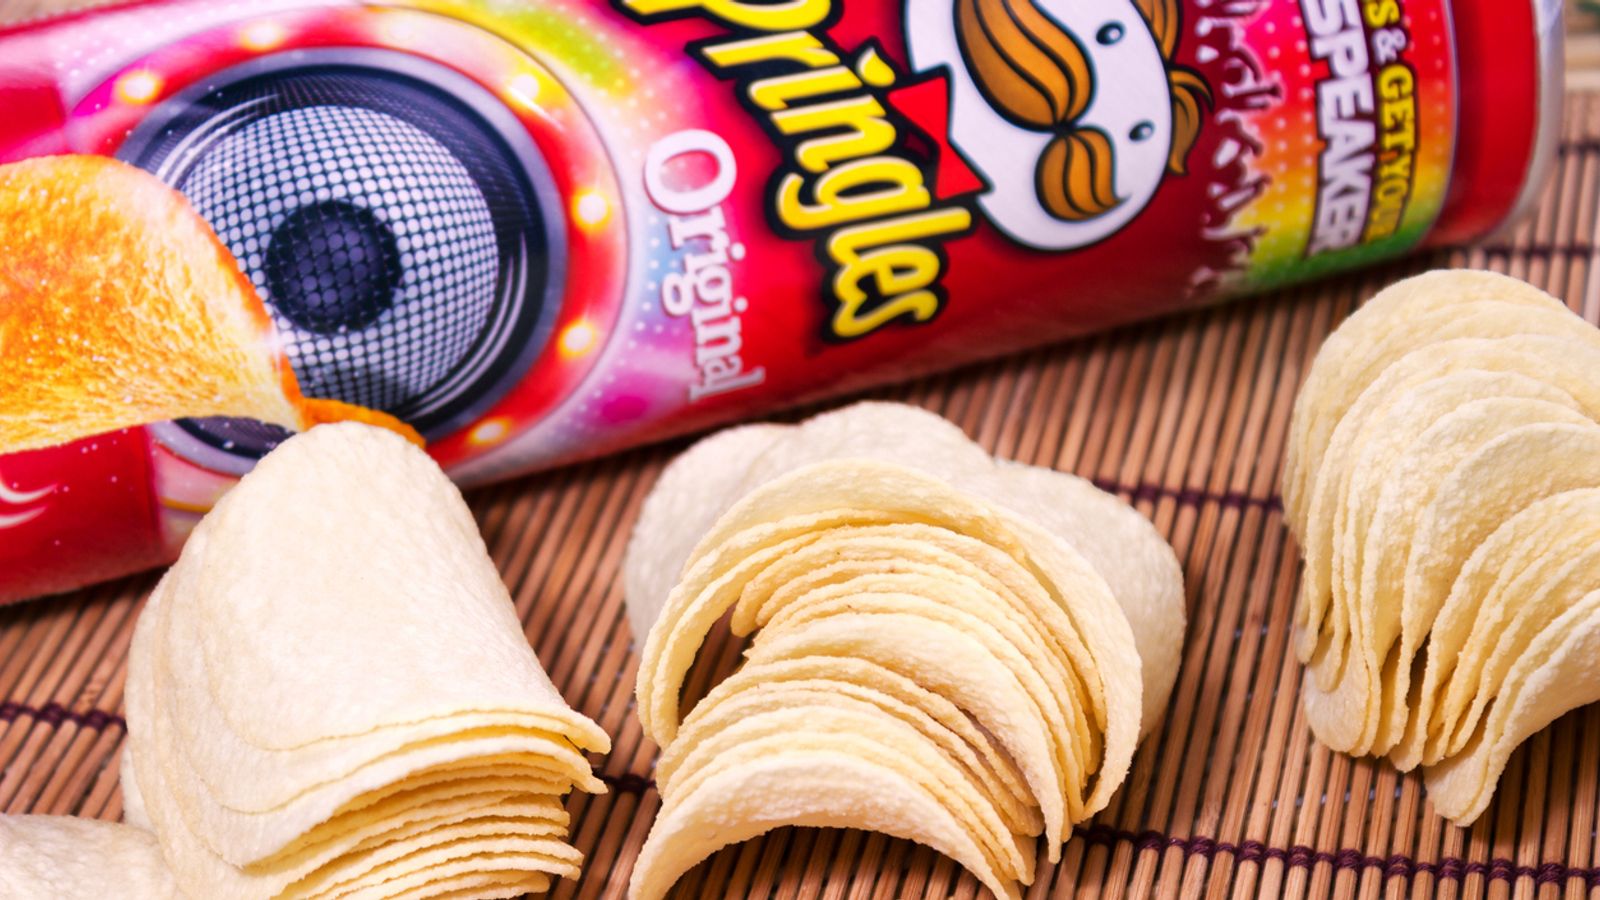 Pringles thief told police 'once you pop, you can't stop'